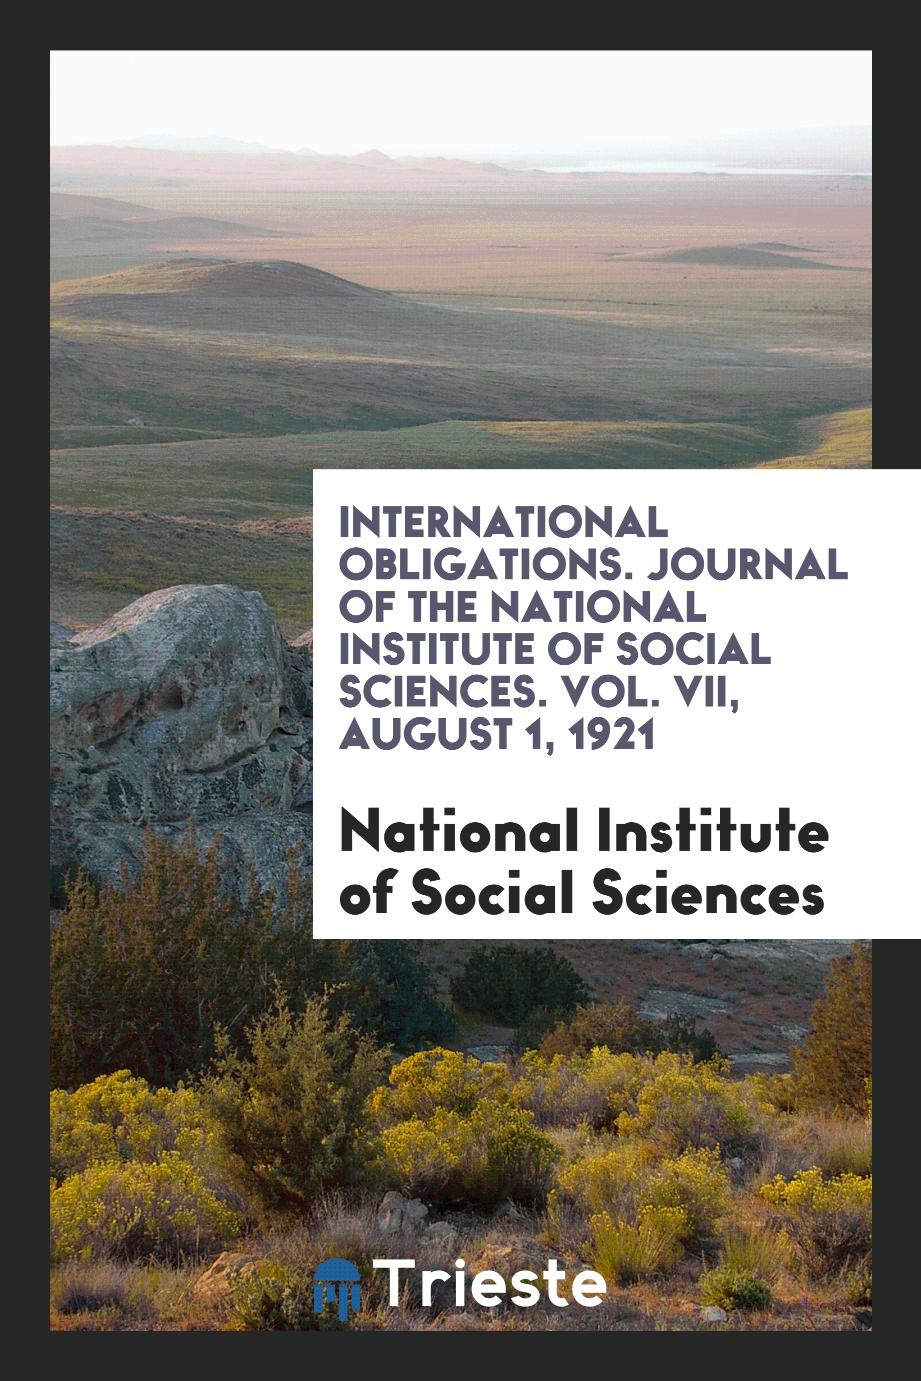 International Obligations. Journal of the National Institute of Social Sciences. Vol. VII, August 1, 1921